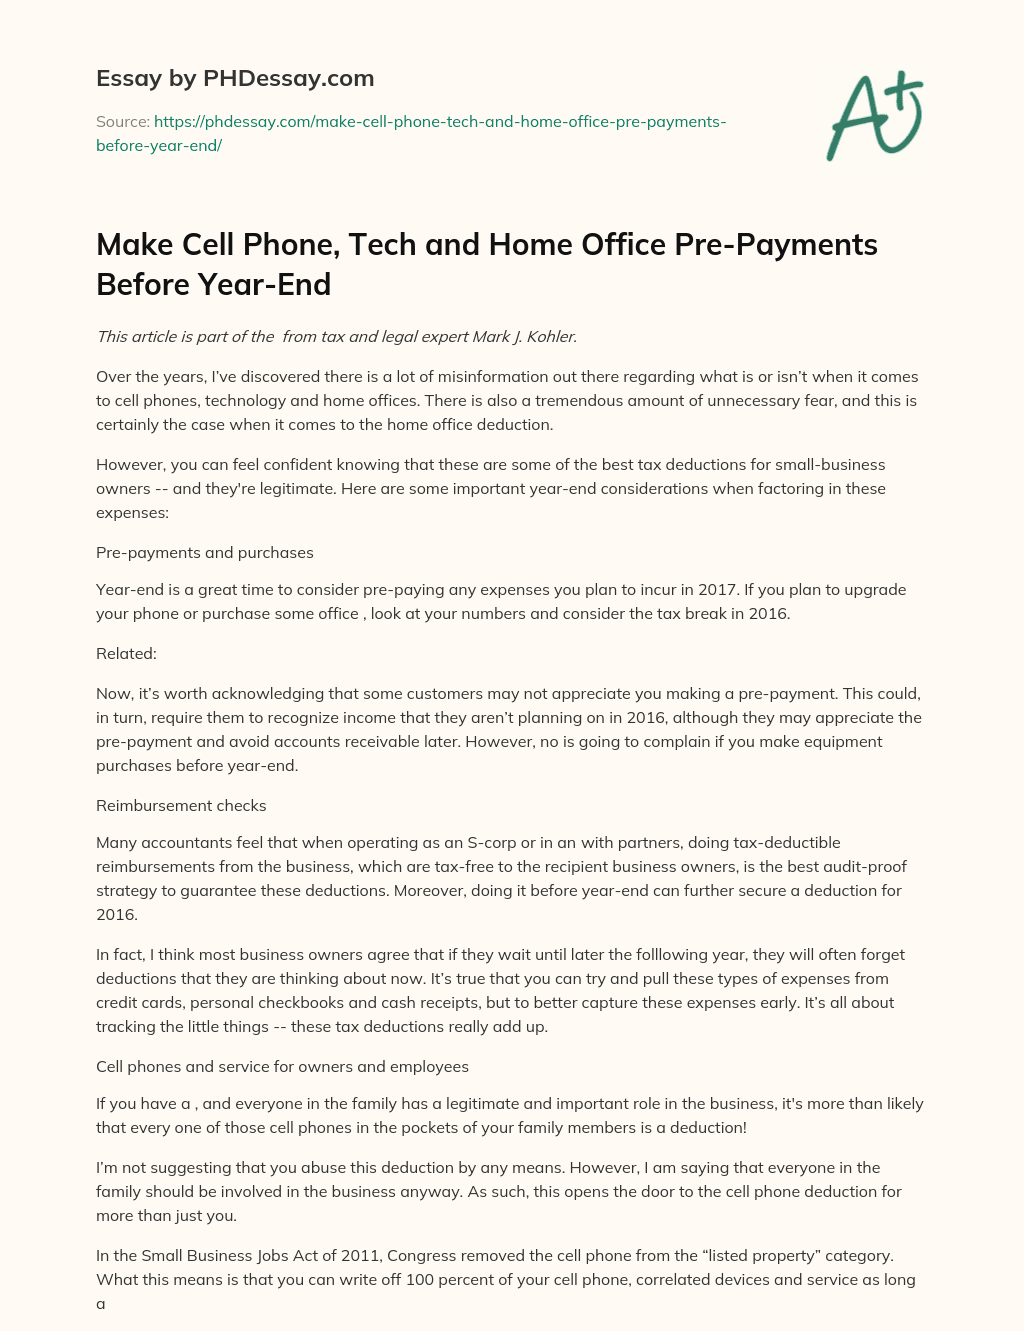 Make Cell Phone, Tech and Home Office Pre-Payments Before Year-End essay